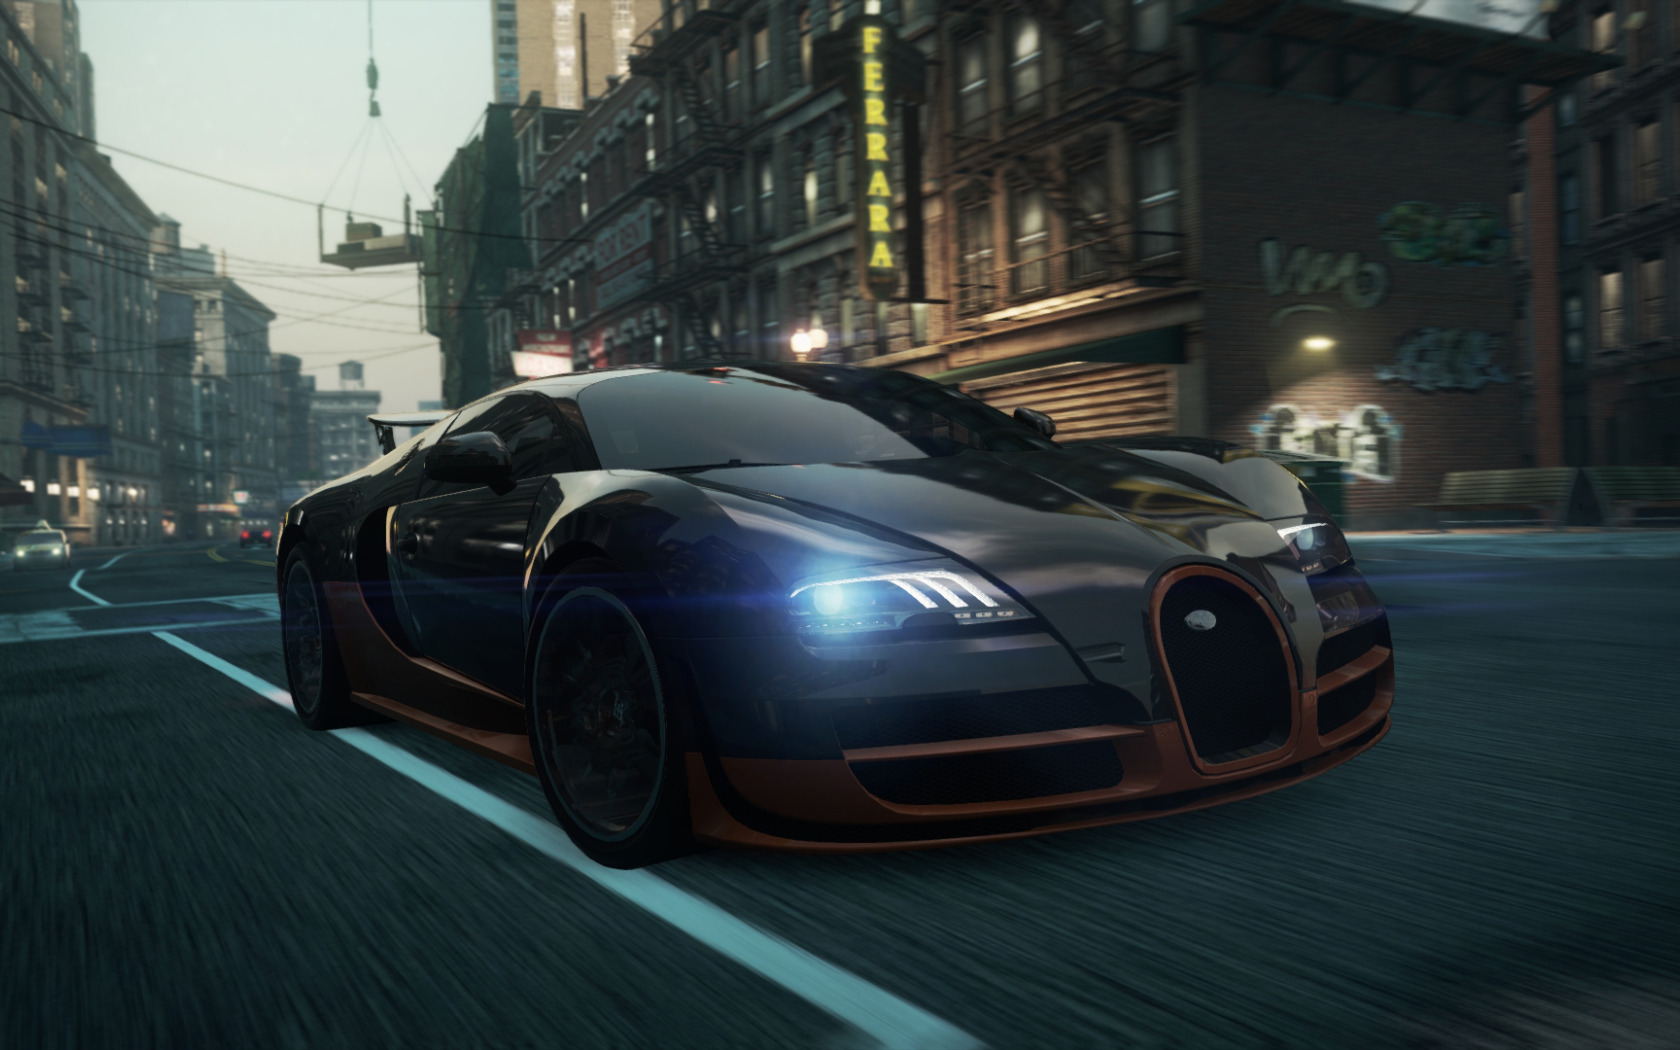 Nfs 2012 игра. Need for Speed most wanted 2012. Бугатти Вейрон в most wanted 2012. Нед фор СПИД мост вантед 2012. Need for Speed most wanted 2012 Bugatti Veyron super Sport.